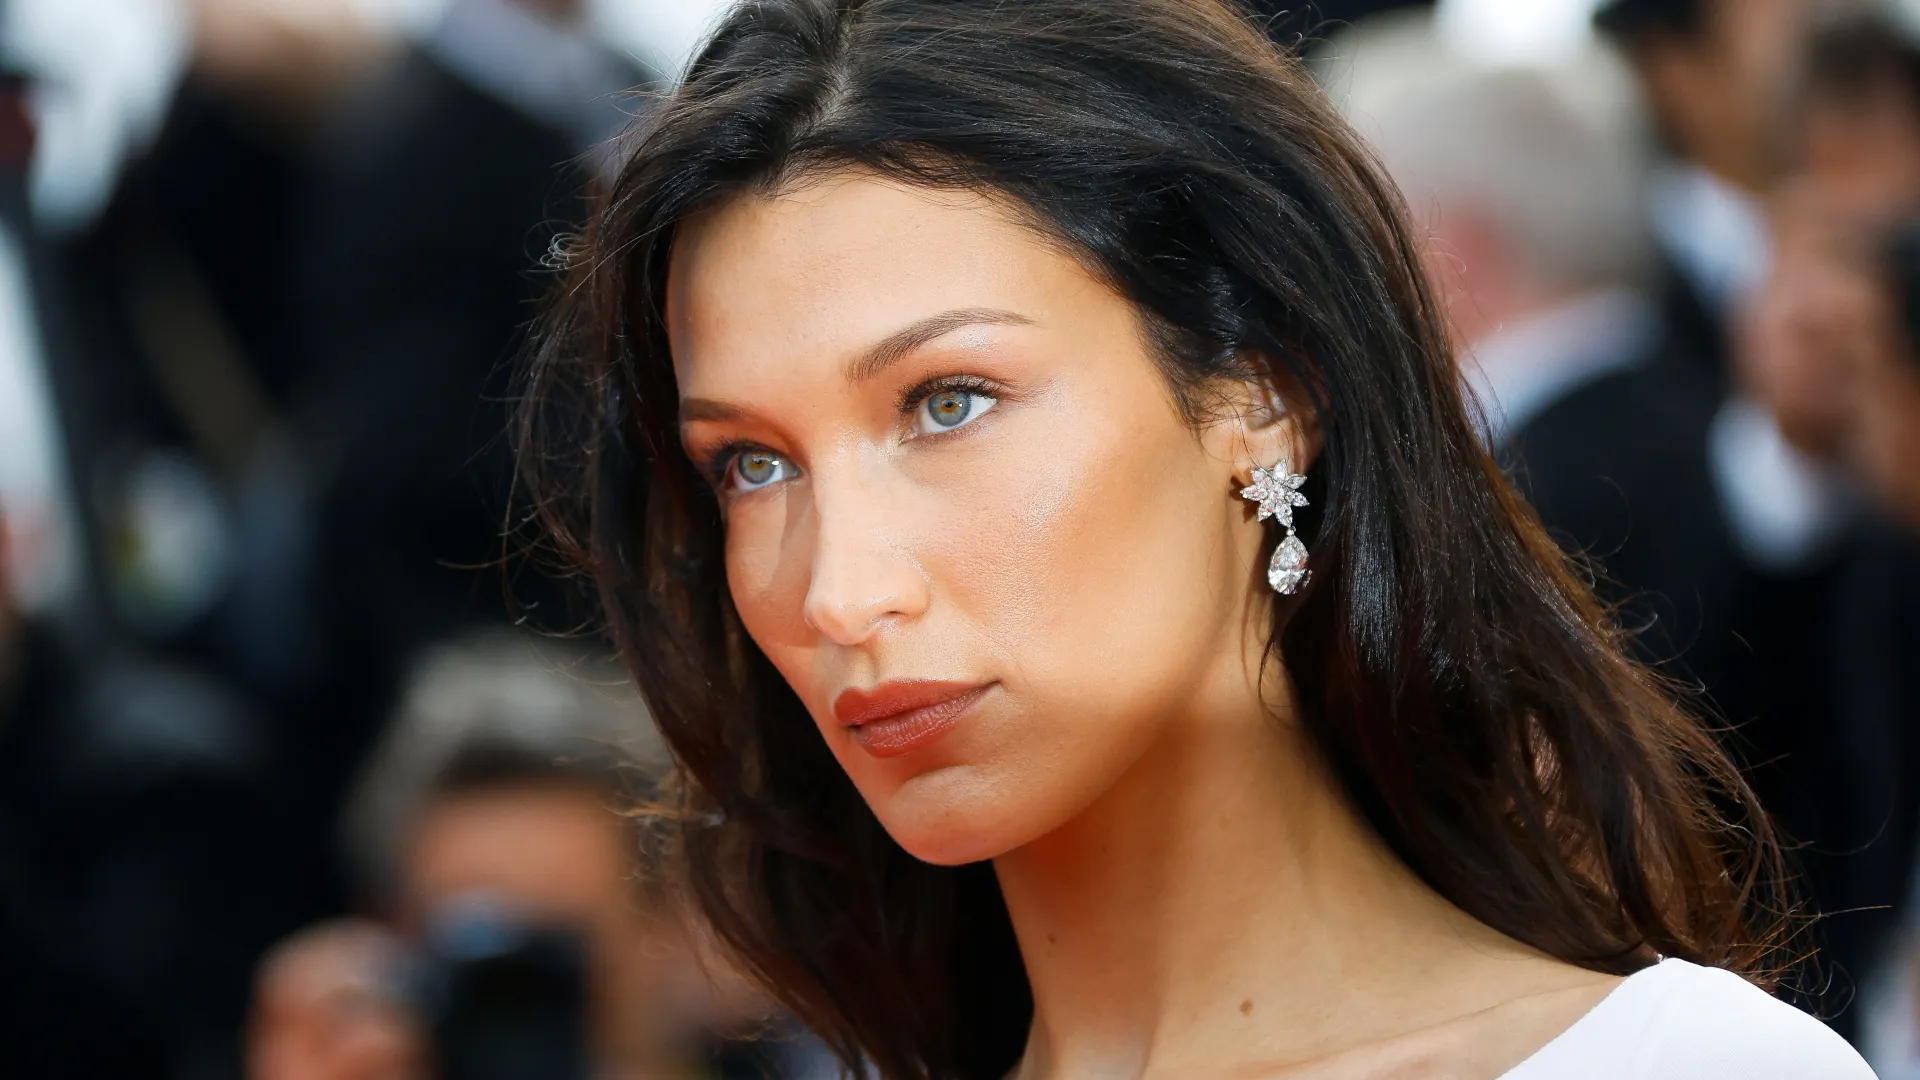 Bella Hadid Condemns Terrorism And Speaks Out On Israel-Hamas Attacks